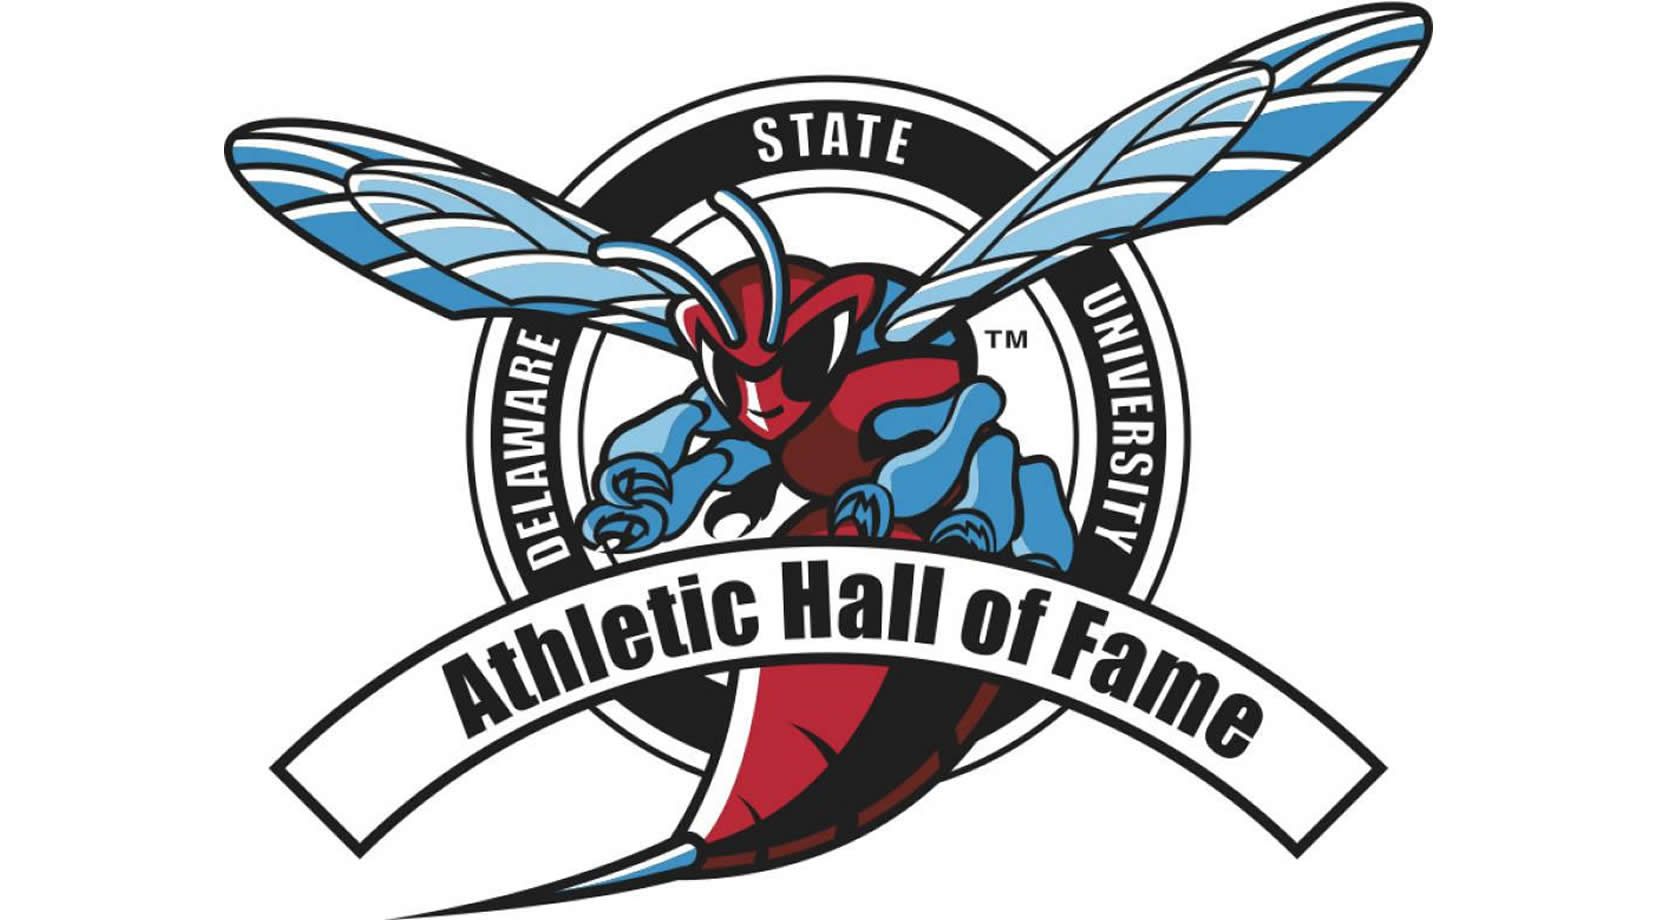 Delaware State University Athletic Hall of Fame